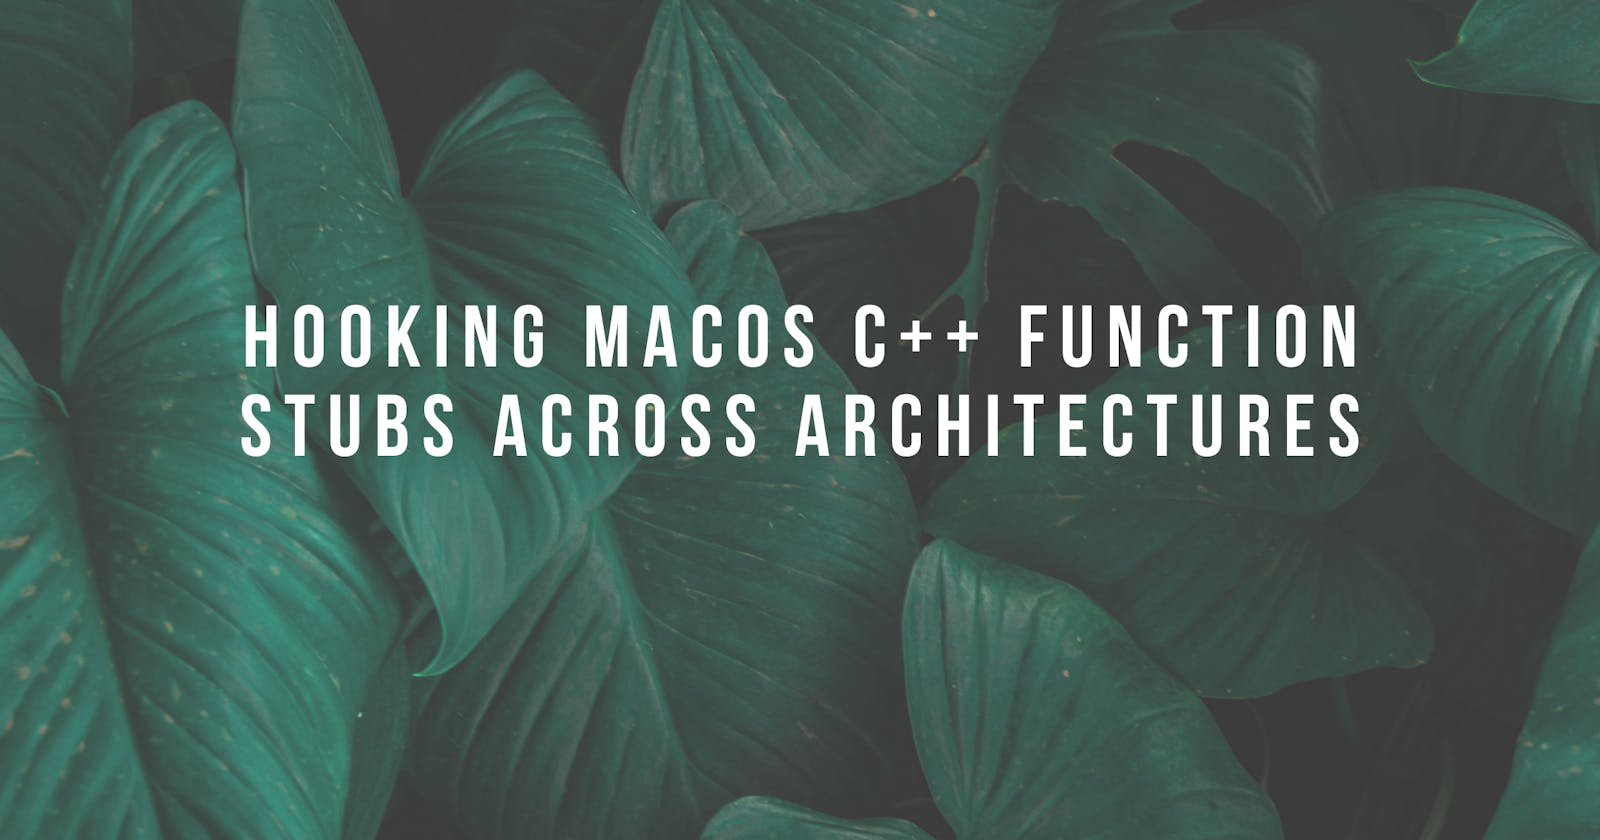 Hooking MacOS C++ Function Stubs Across Architectures